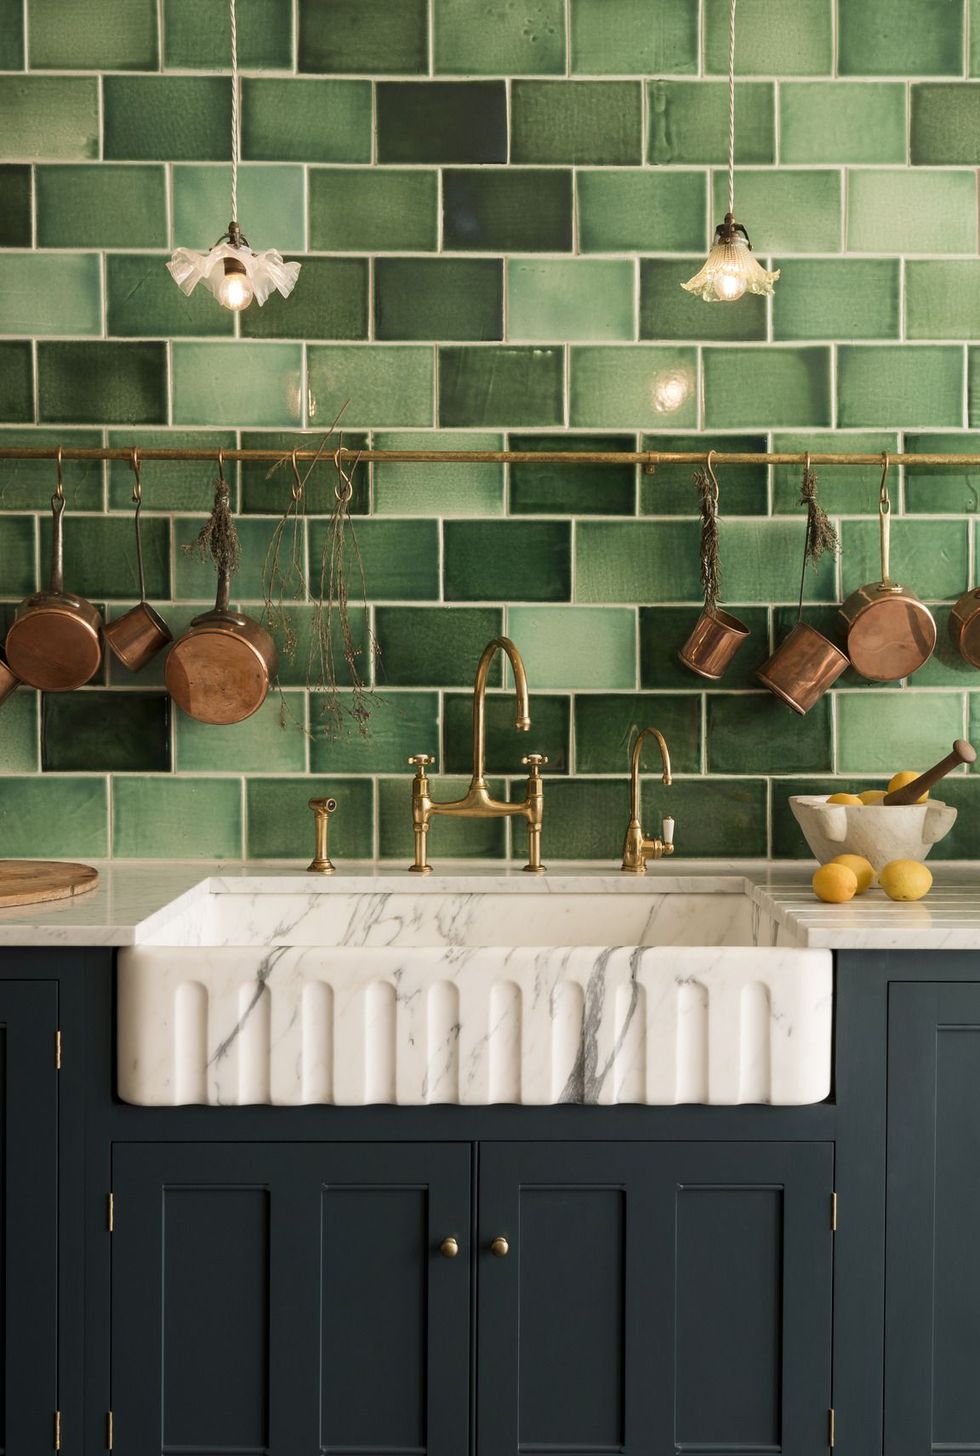 copper pots hung on pot rail in place of upper kitchen cabinets on green tile wall, above butler's sink, dark gray cabinets